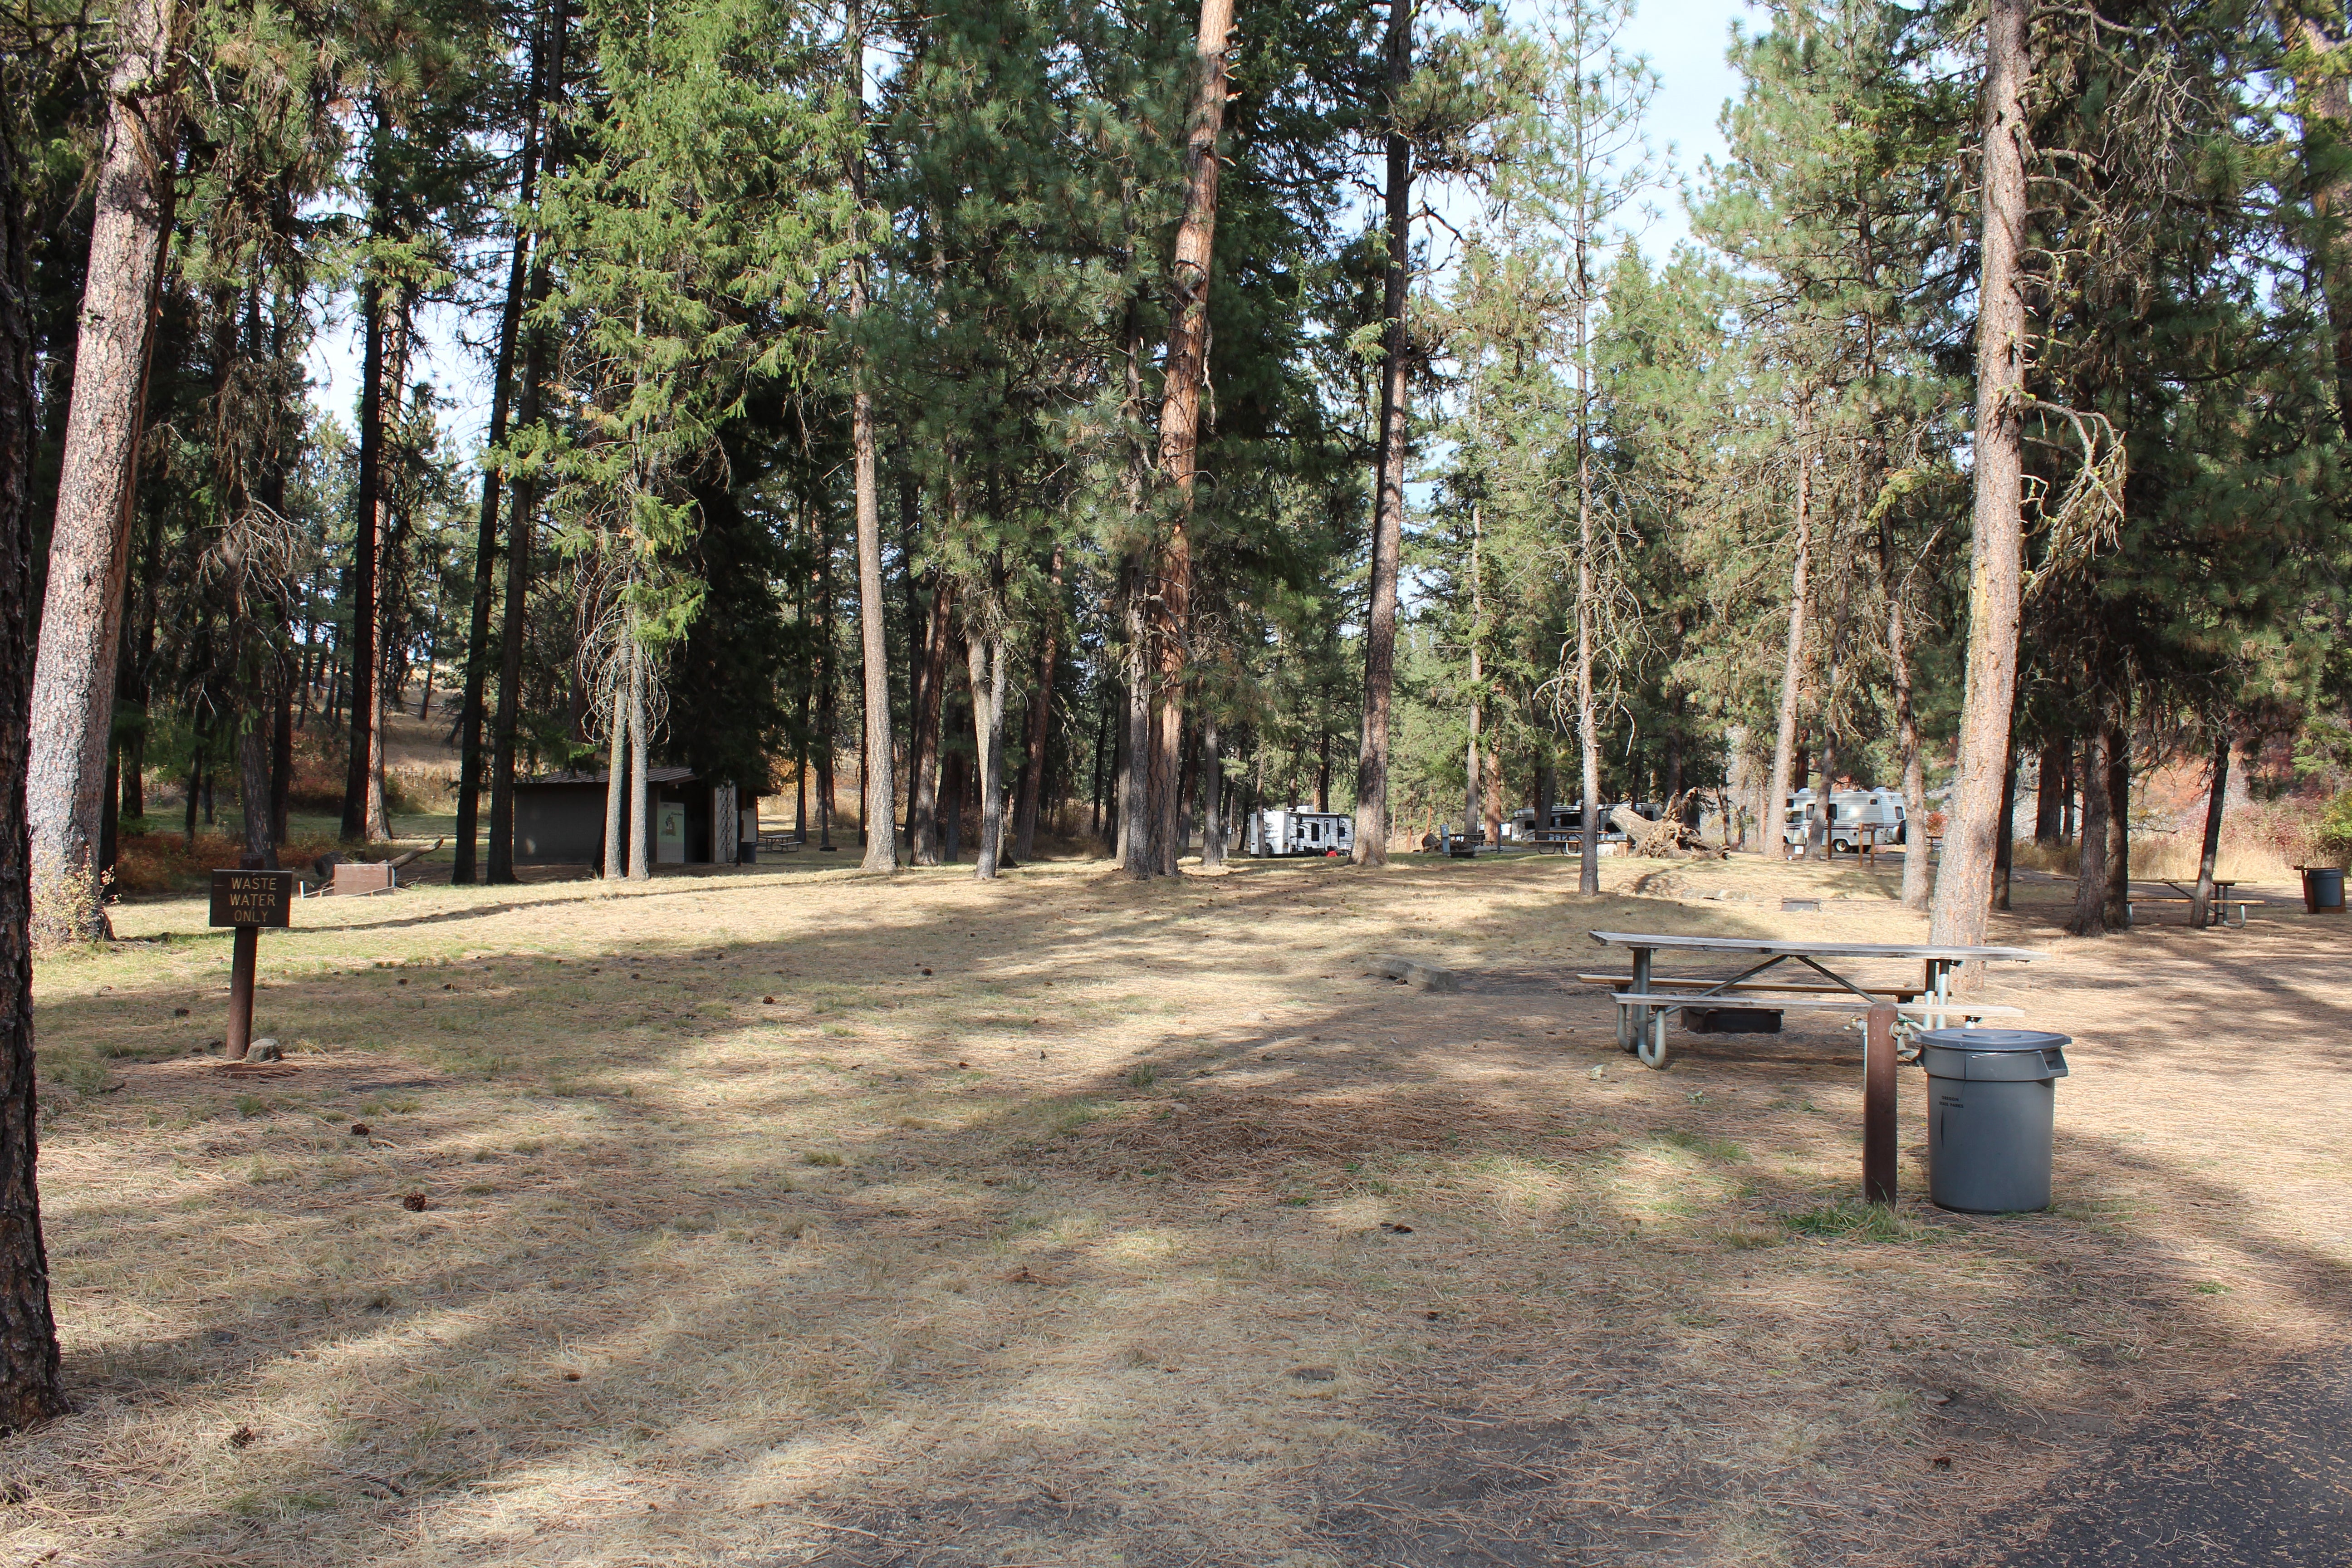 Looking into campground from front.